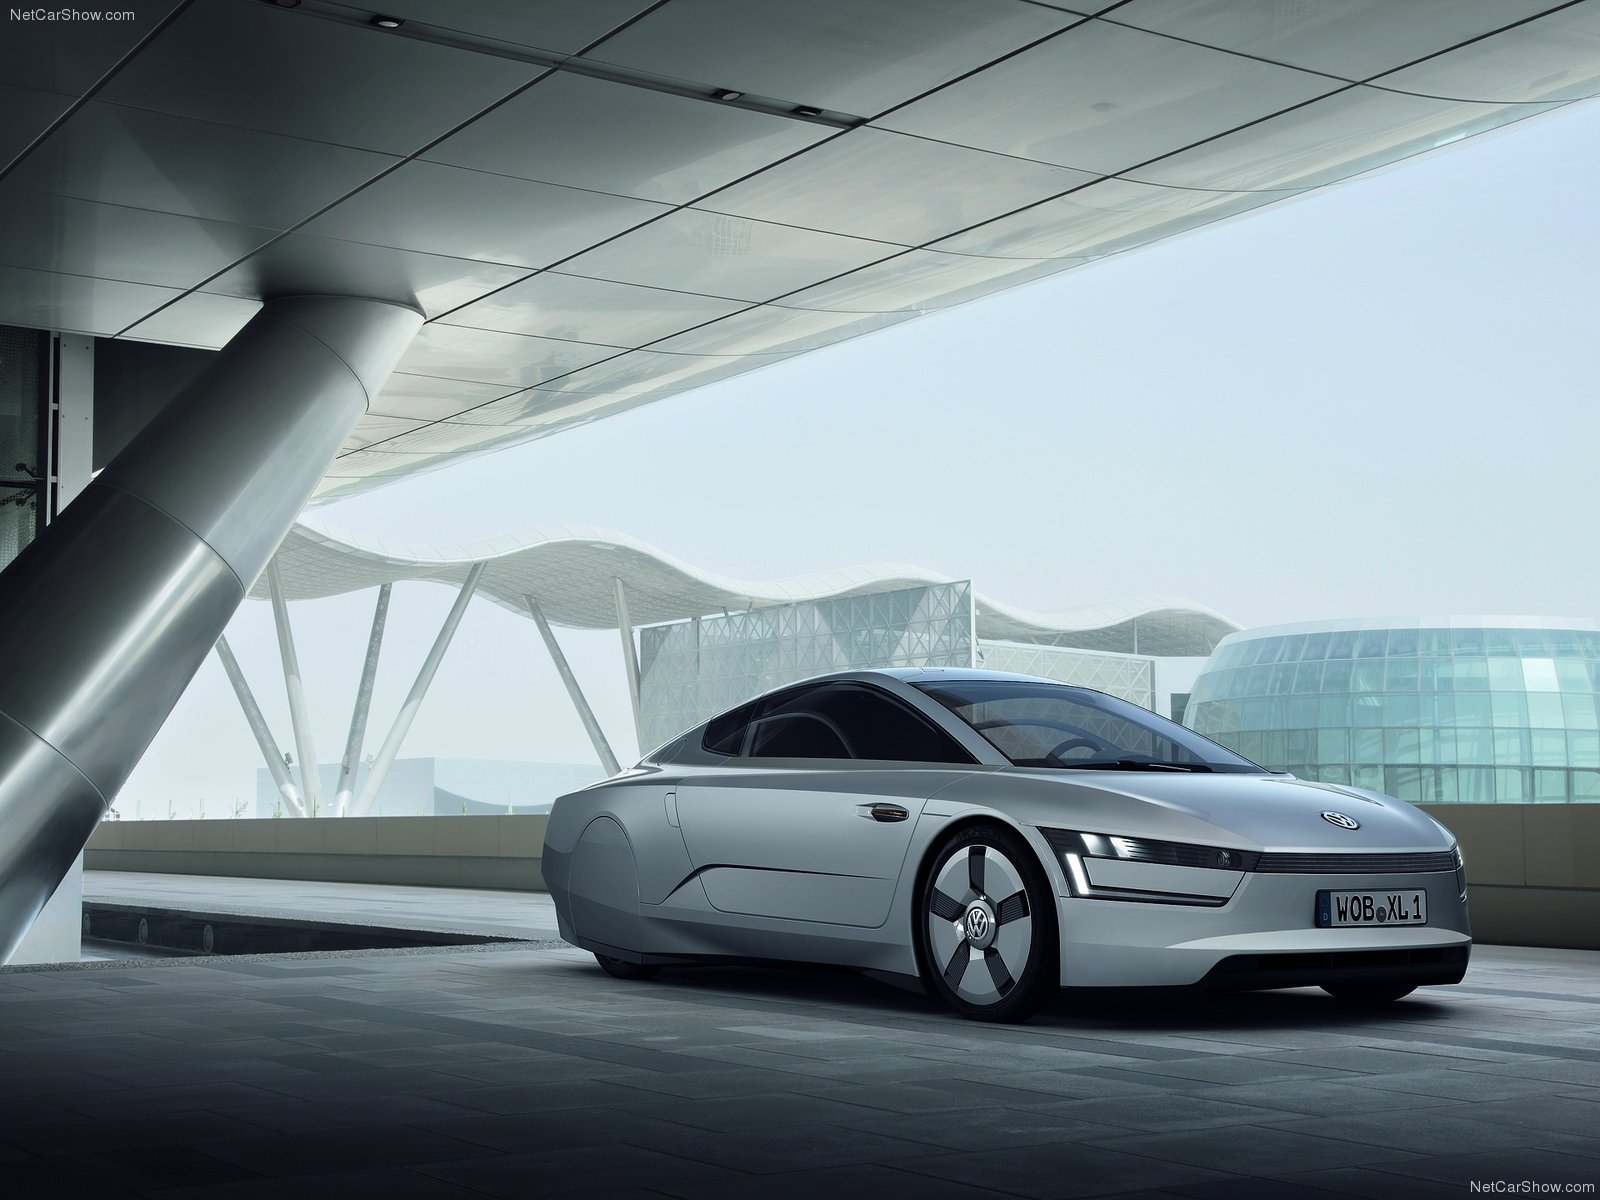 Volkswagen XL1 concept Car Gallery Others Autocar India - 2019 volkswagen xl1 concept wallpapers